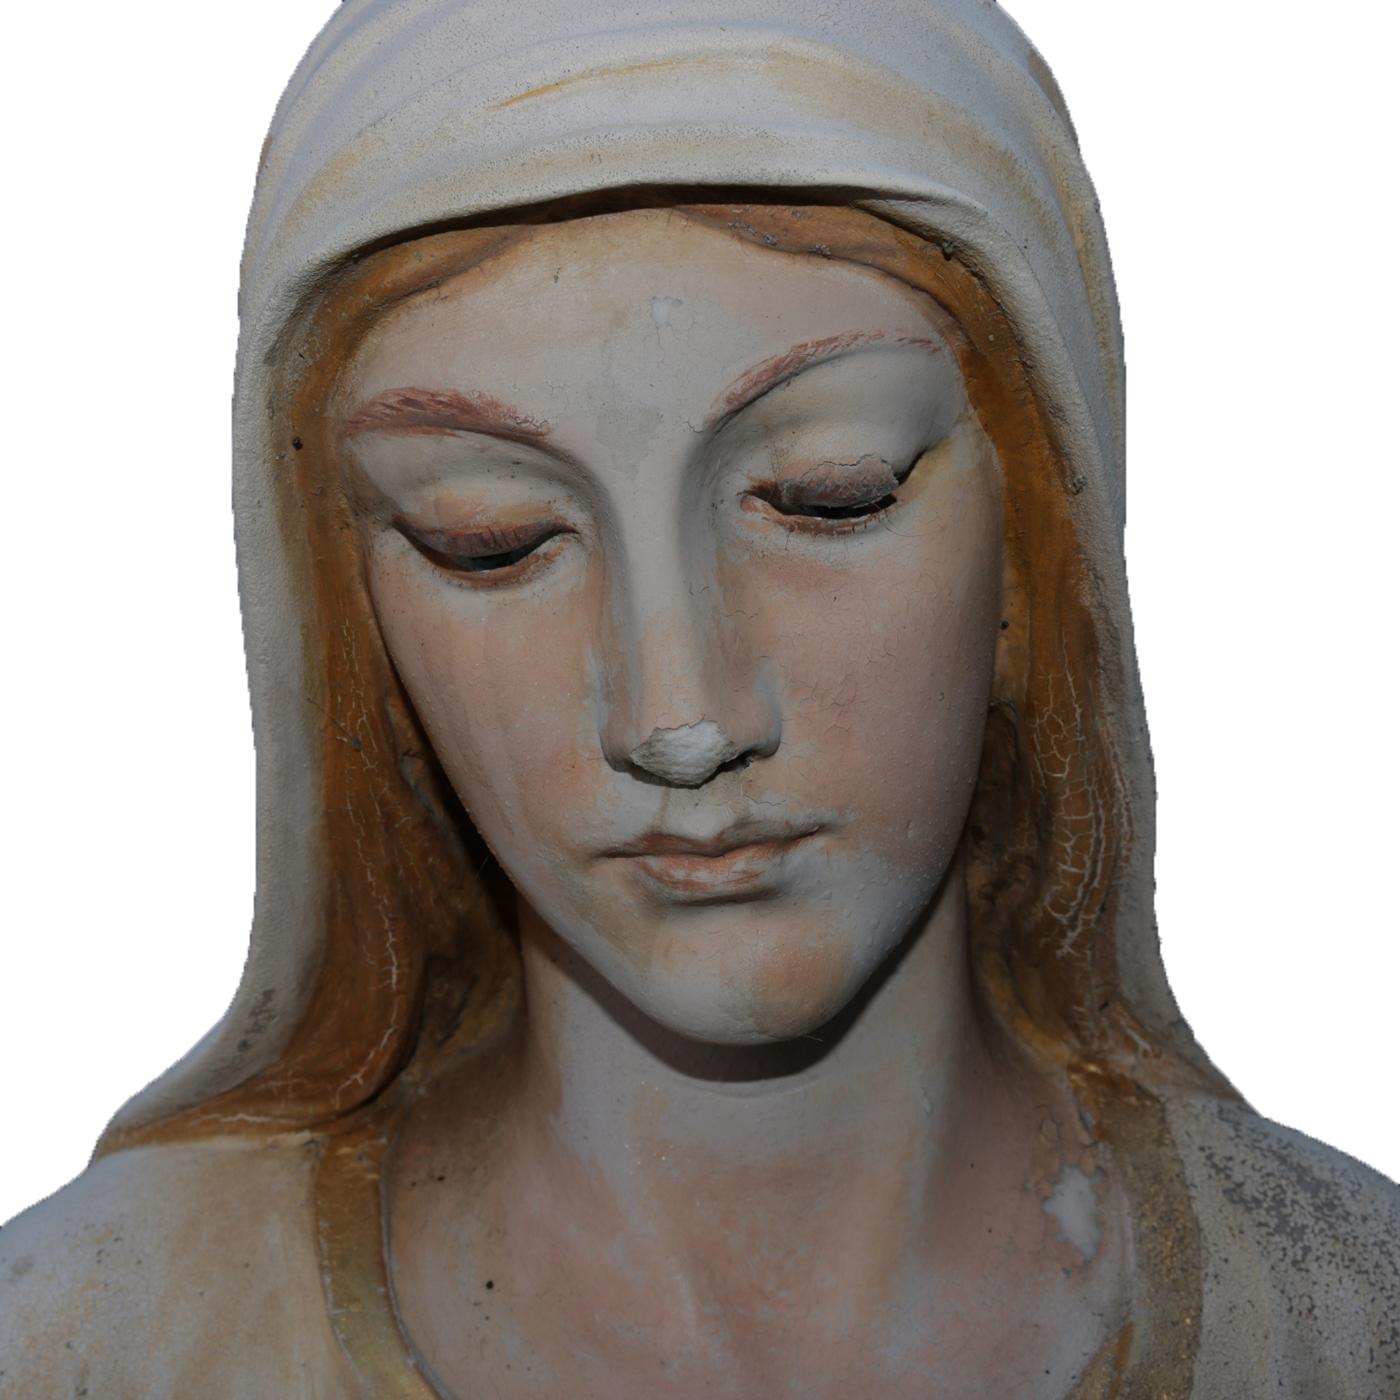 Magnificent life-size polychrome marble Italian statue of the Mother Mary features detailed carving and gilt highlights on the crown and robe, circa 1920. Deaccessioned from a Syracuse, NY basilica,  crown is not original to statue.

Measures: